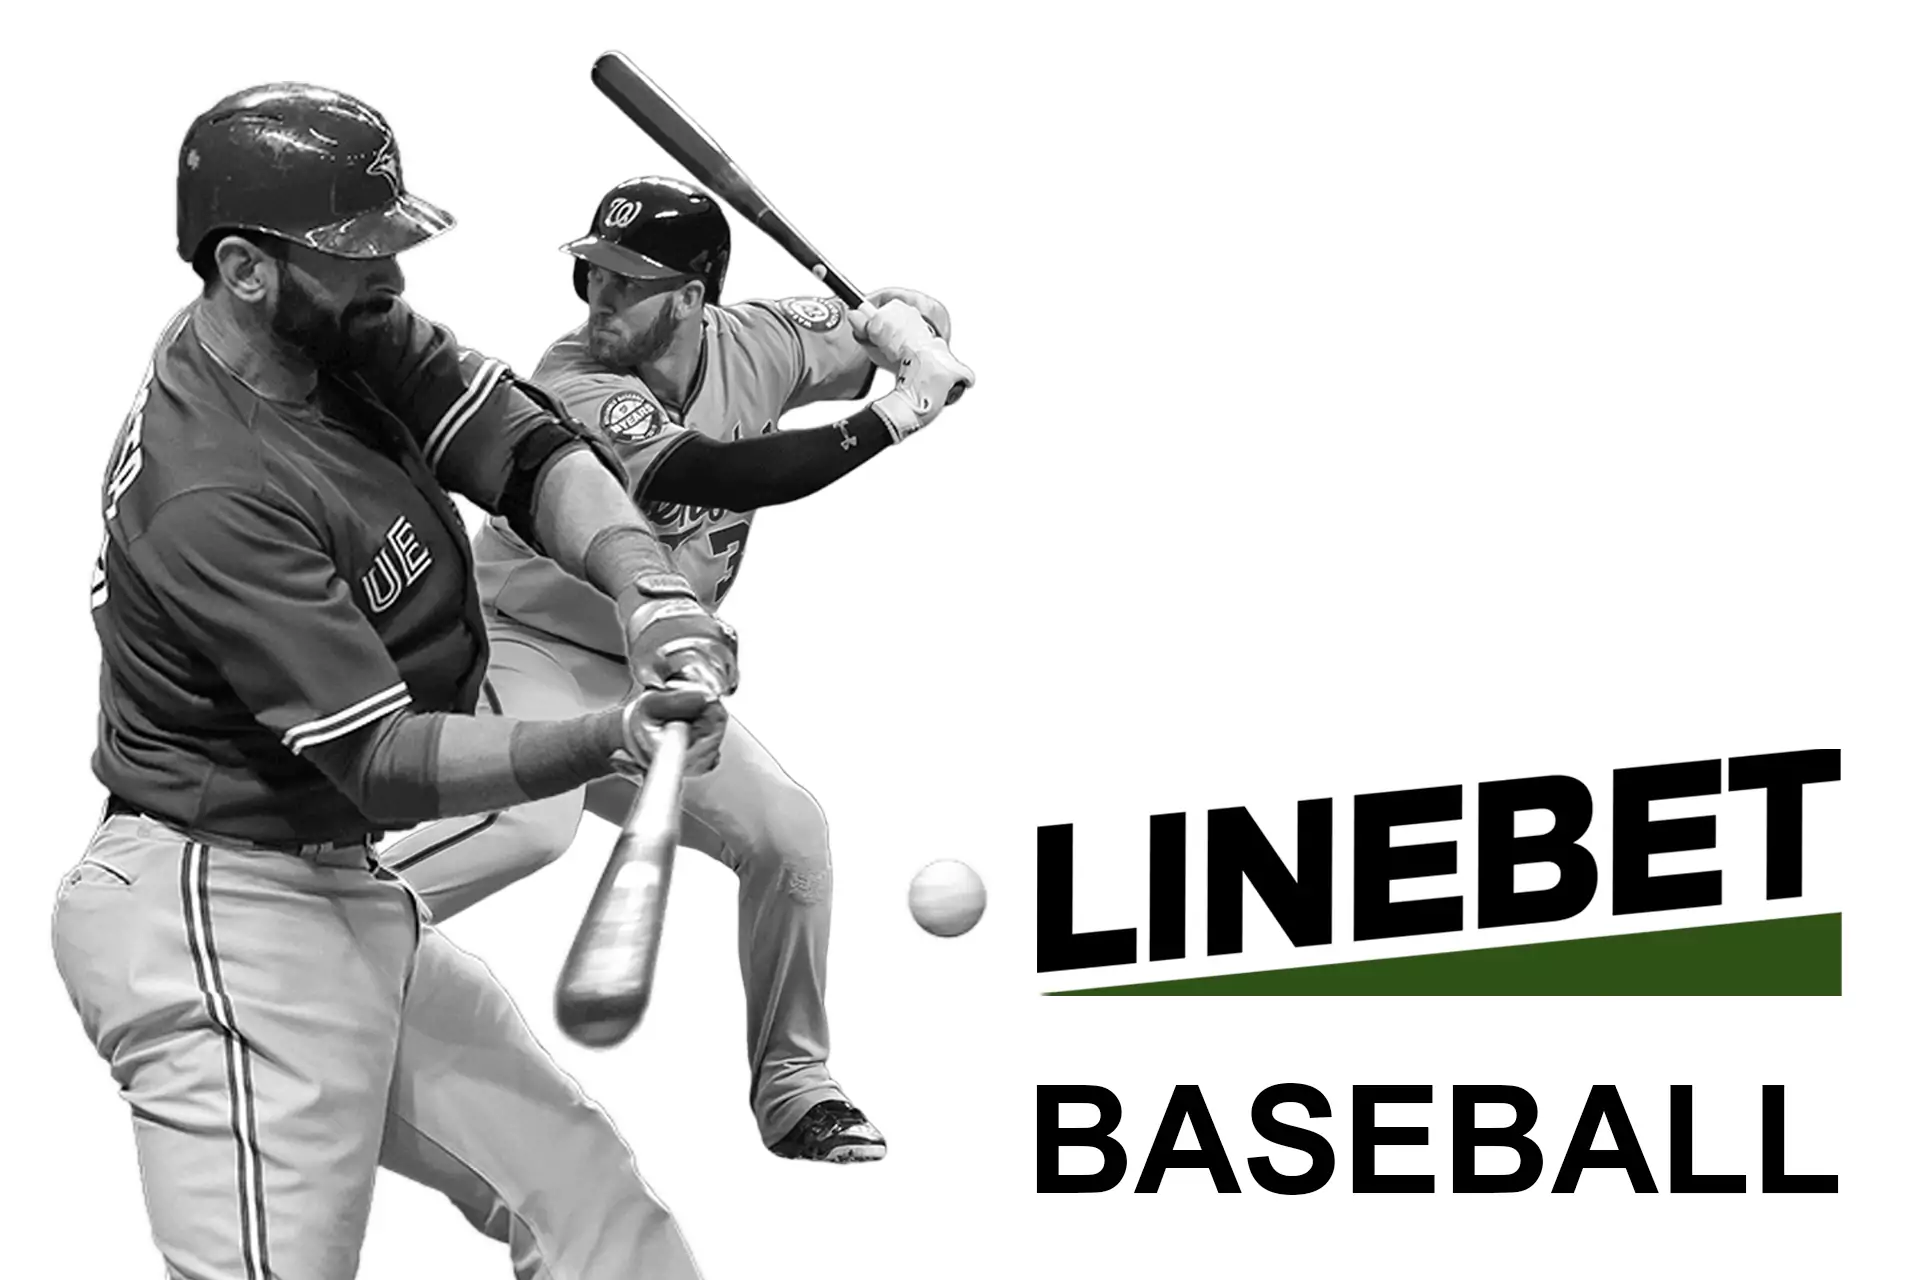 Baseball has its fans among sports lovers and is available for betting at Linebet.